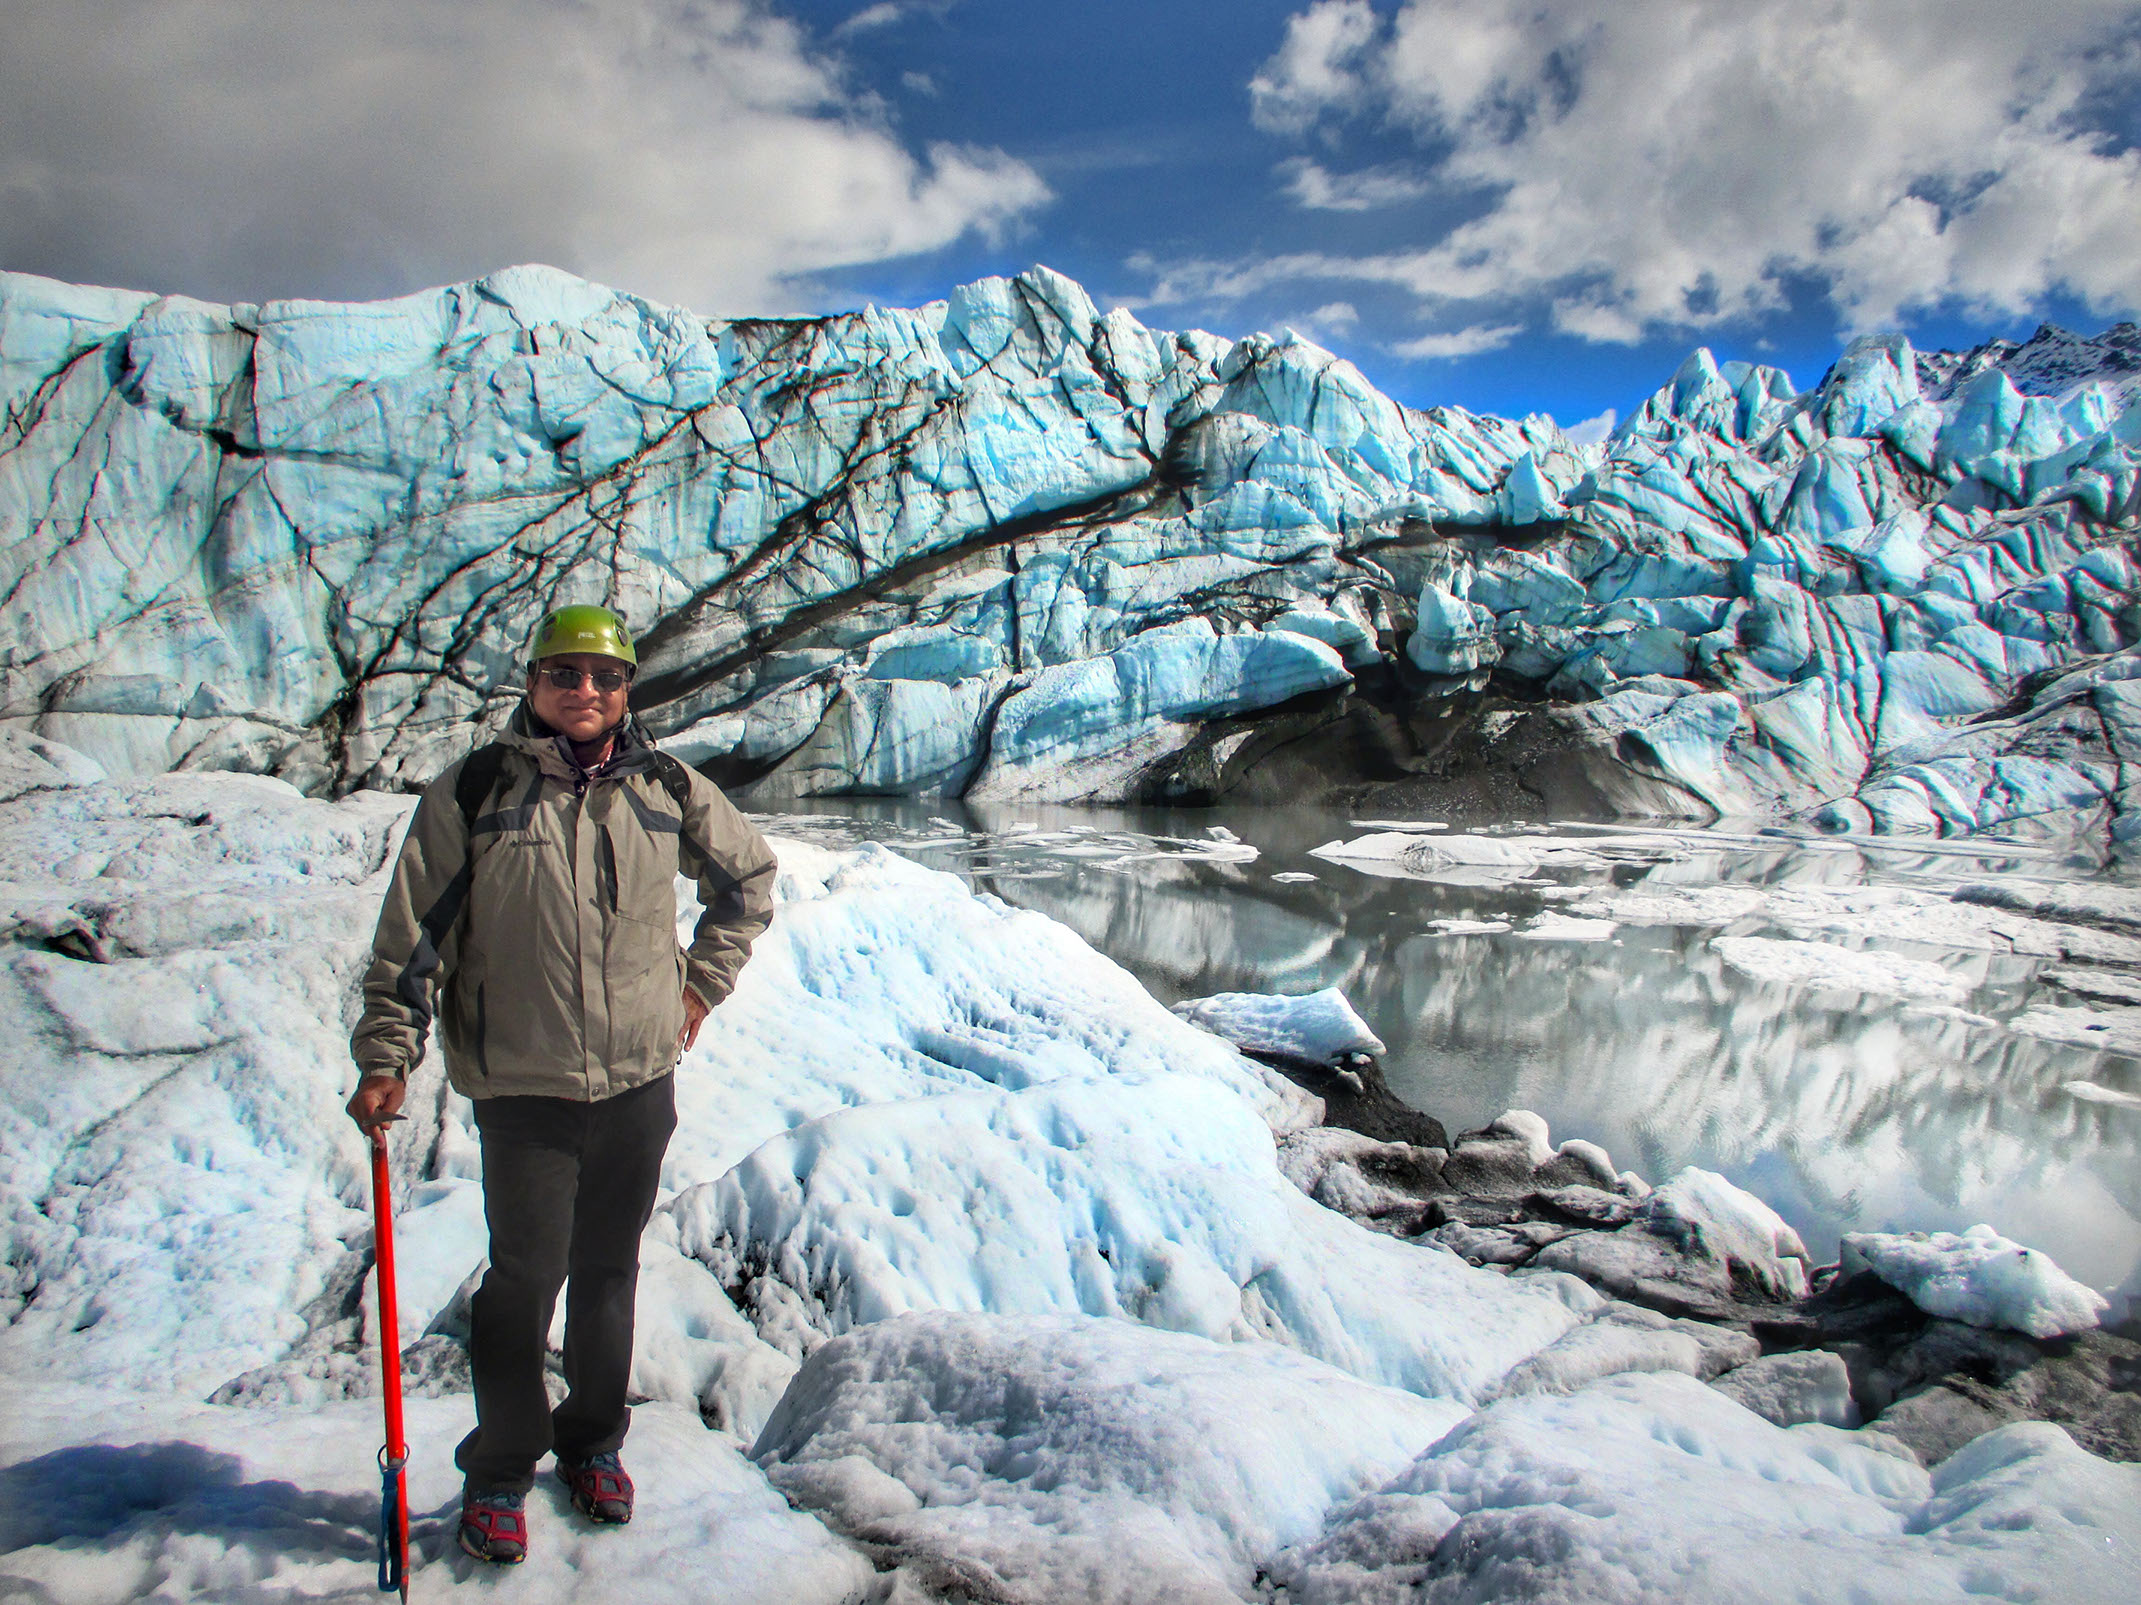 Here, Rahuldev Rajguru outfitted with helmet, crampons & ice axe in the middle of Matanuska glacier in Alaska